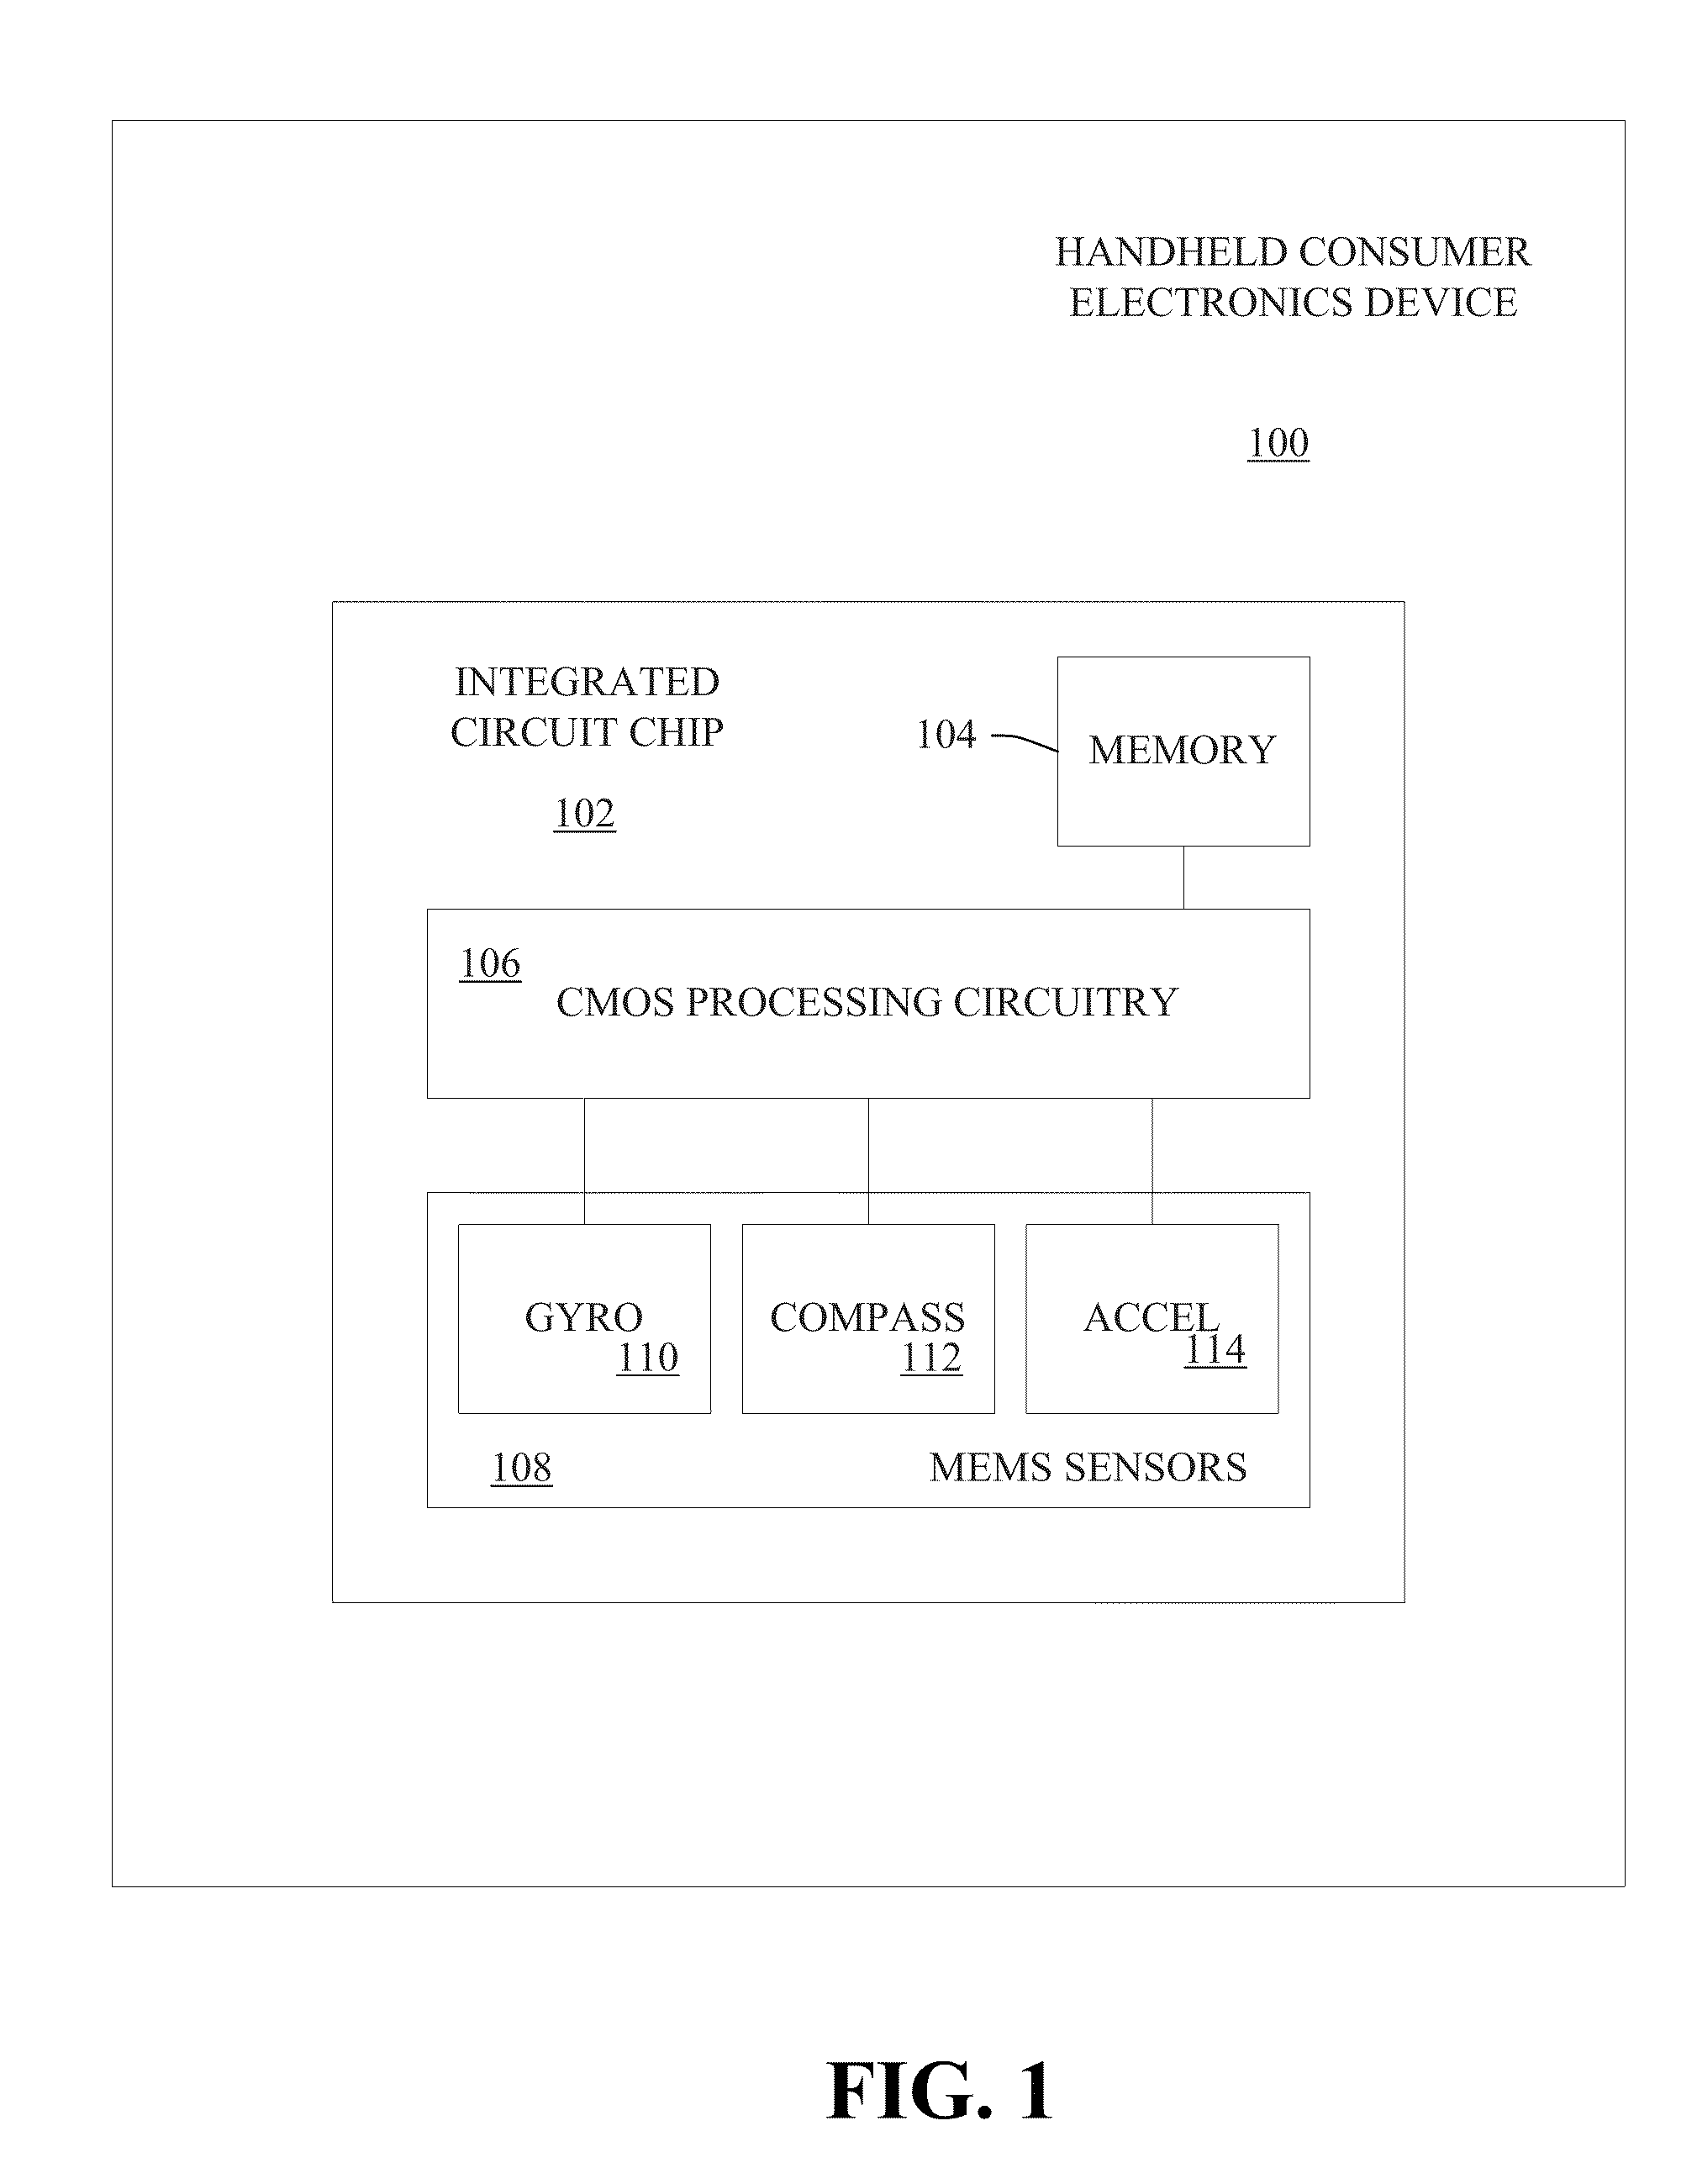 Apparatus and methodology for calibration of a gyroscope and a compass included in a handheld device